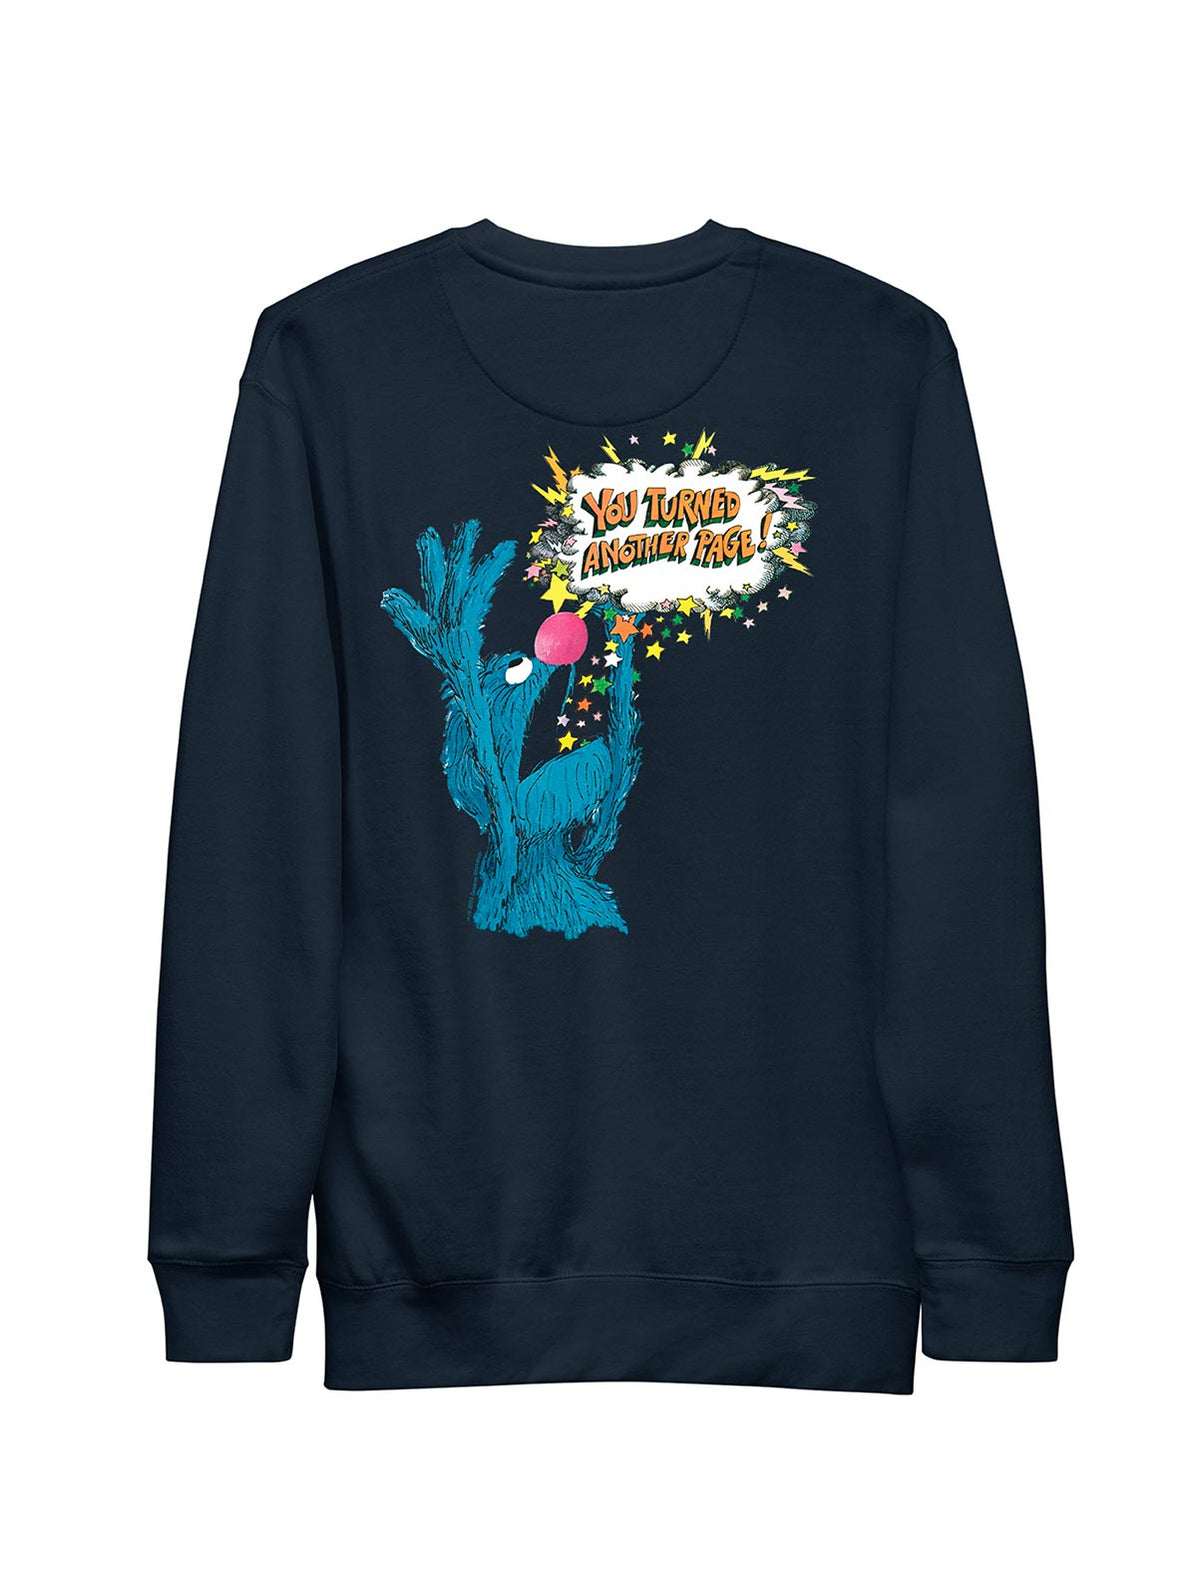 Sesame Street - The Monster at the End of This Book Unisex Sweatshirt ...